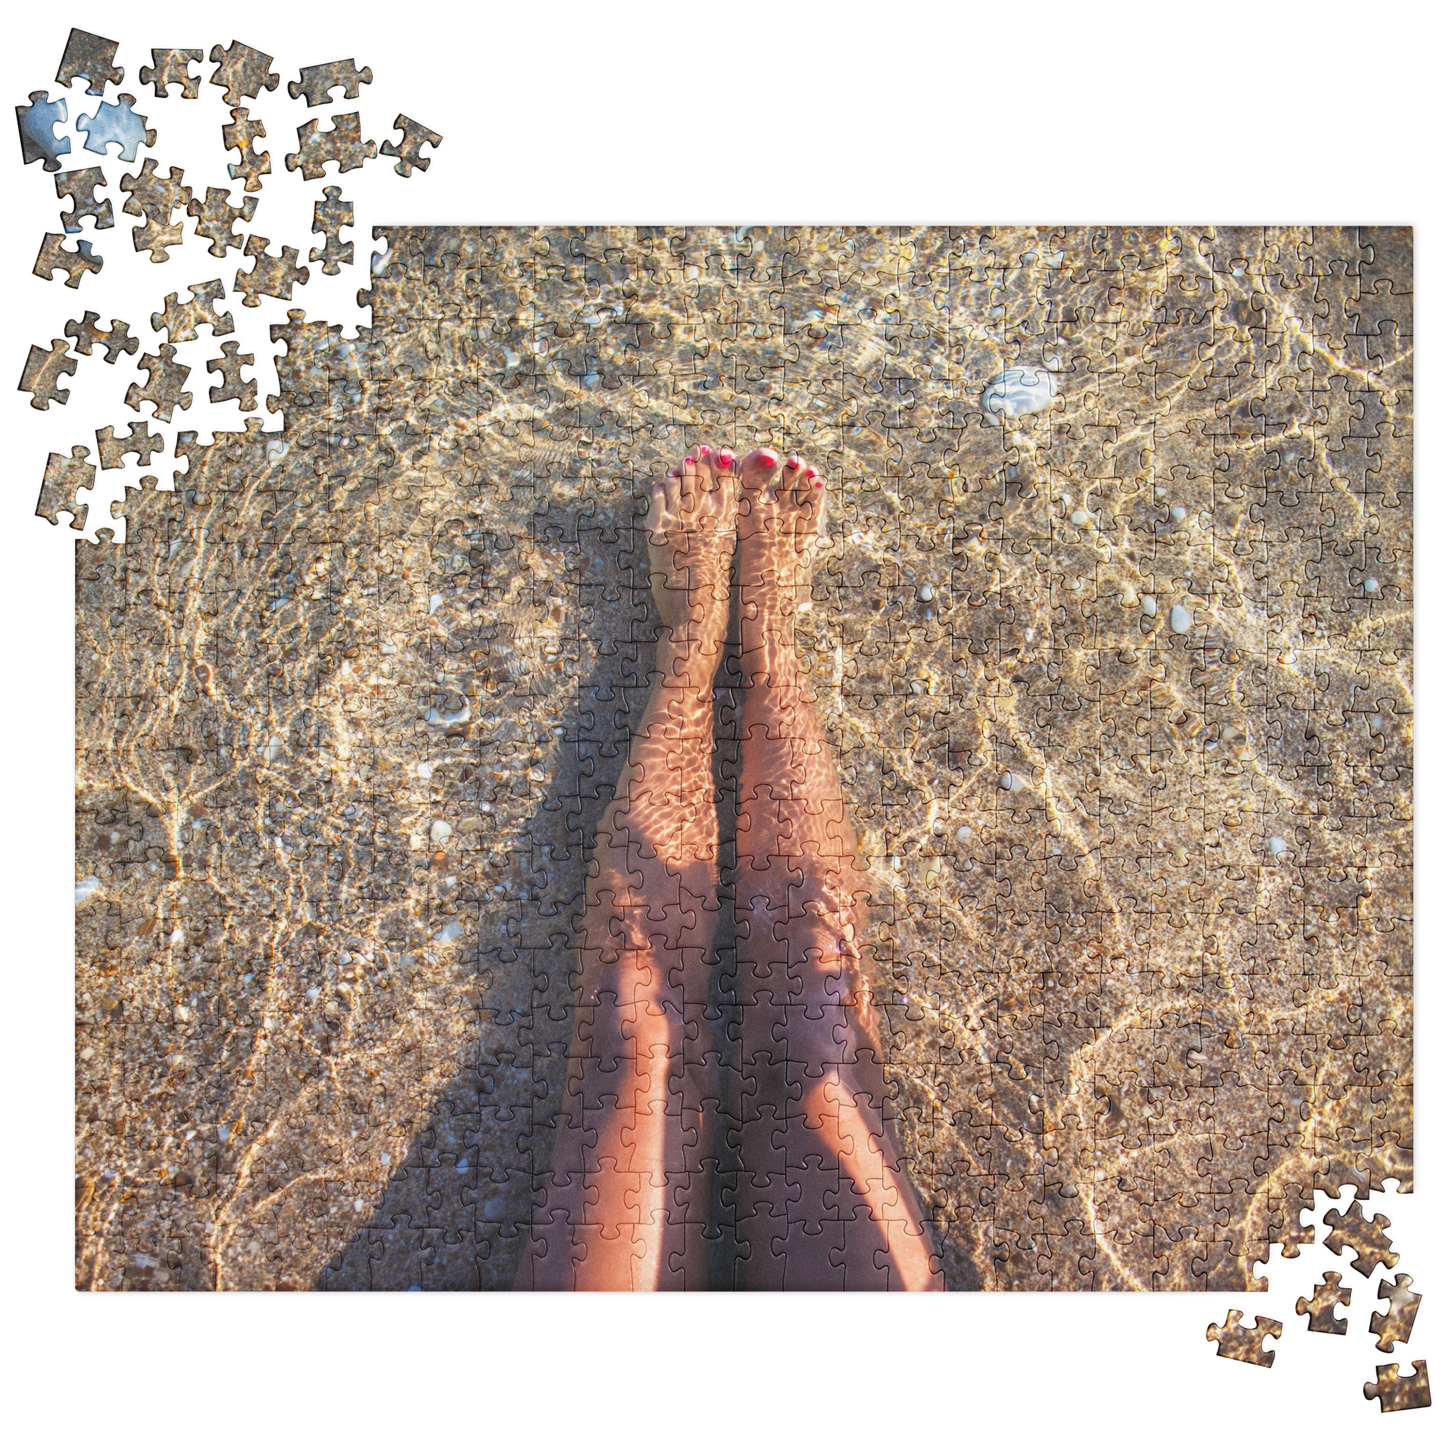 Summer Jigsaw Puzzle: Legs in the Sandy Water